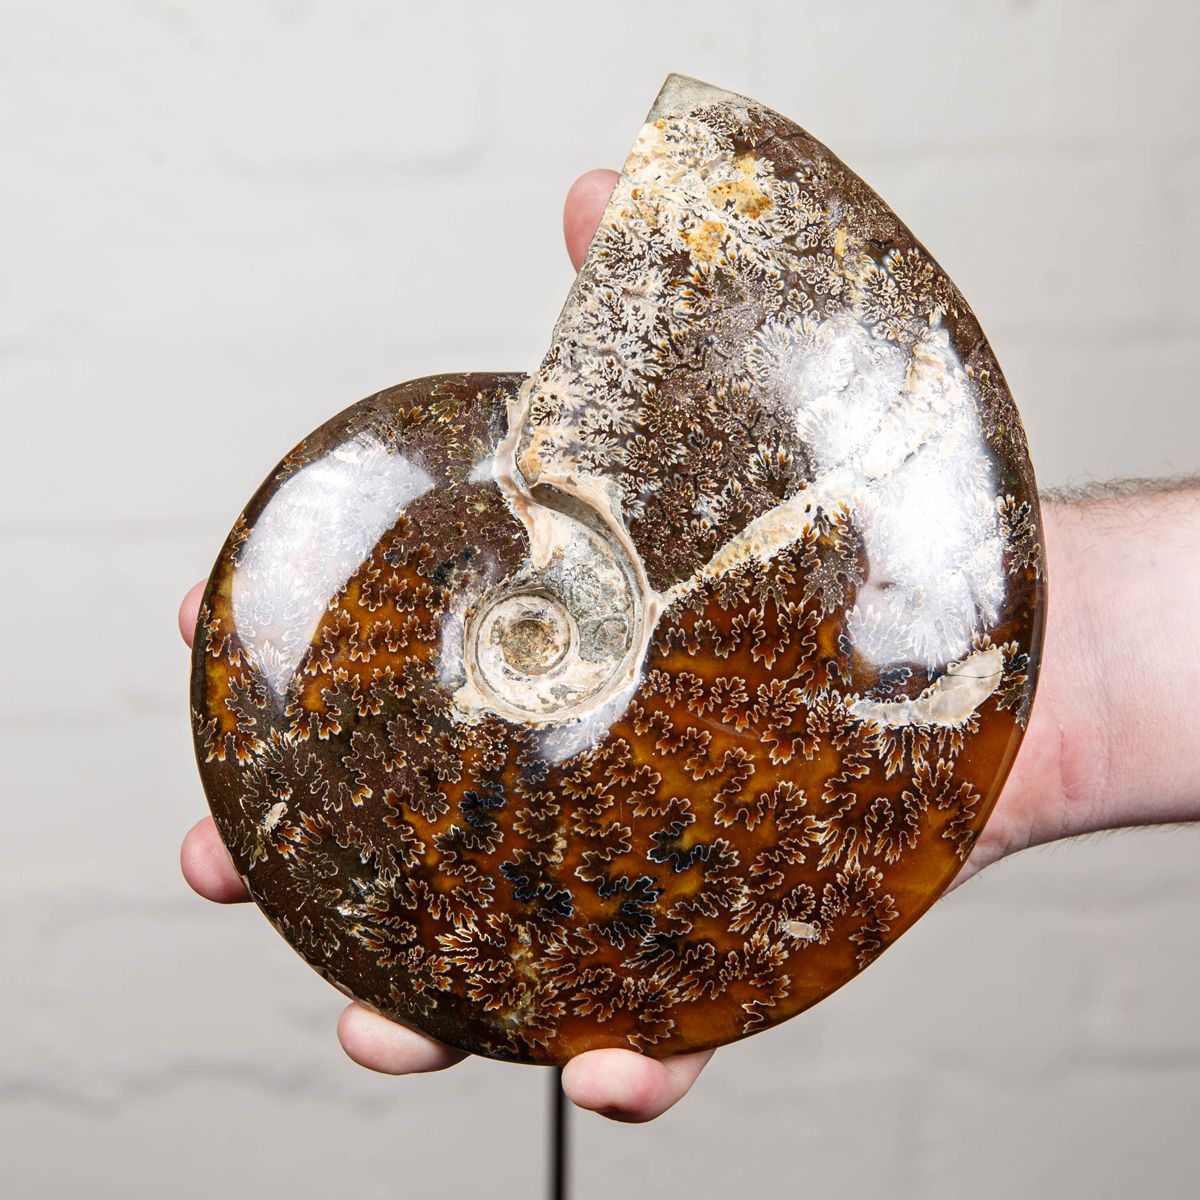 Huge 7.2 inch Whole Polished Ammonite Fossil on Stand (Cleoniceras sp)